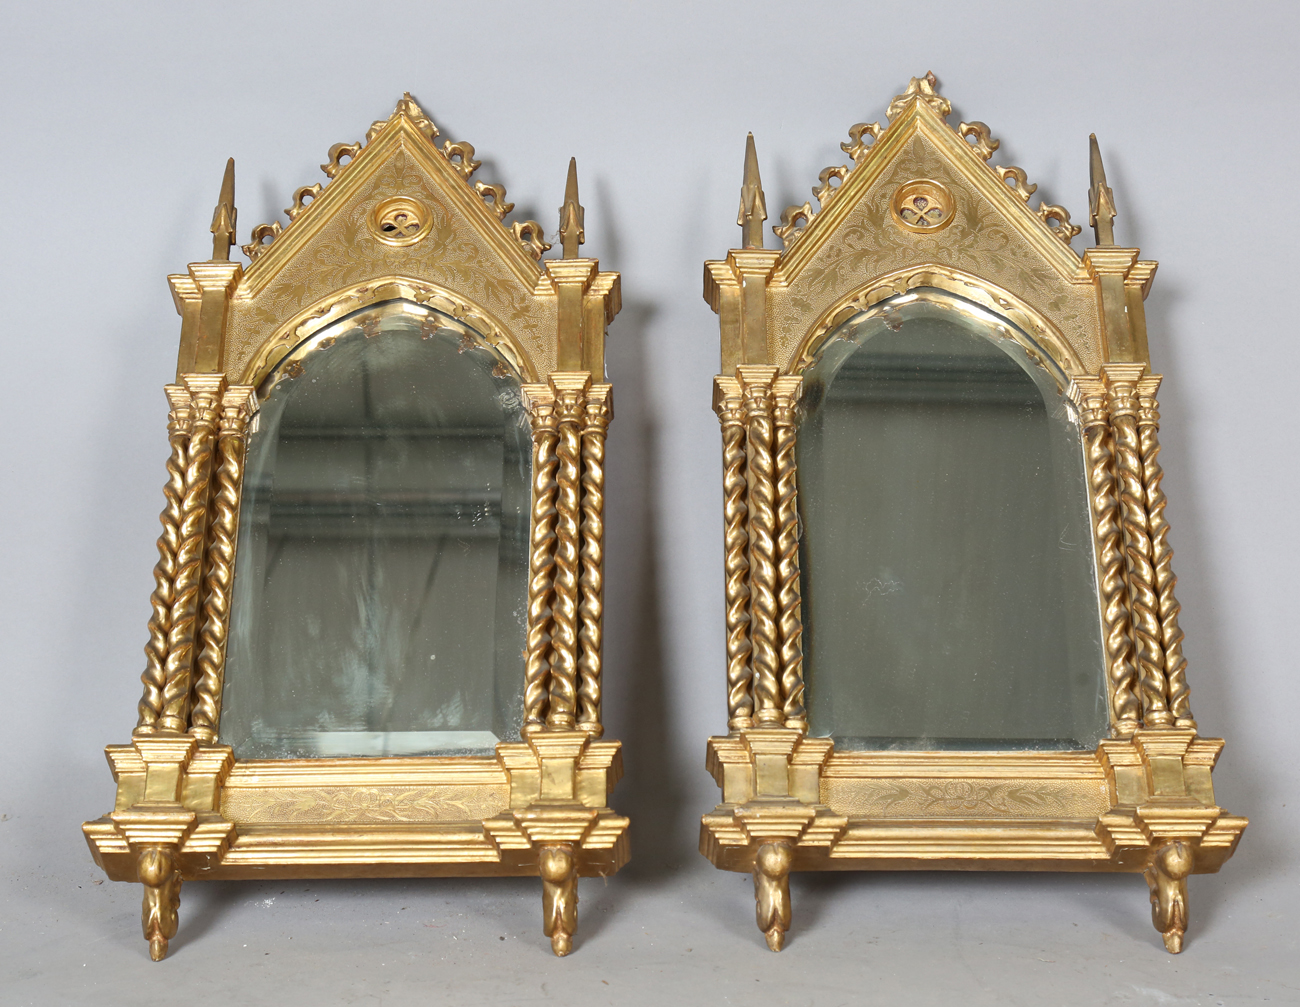 A pair of late 19th century Gothic Revival giltwood and gesso wall mirrors of arched architectural